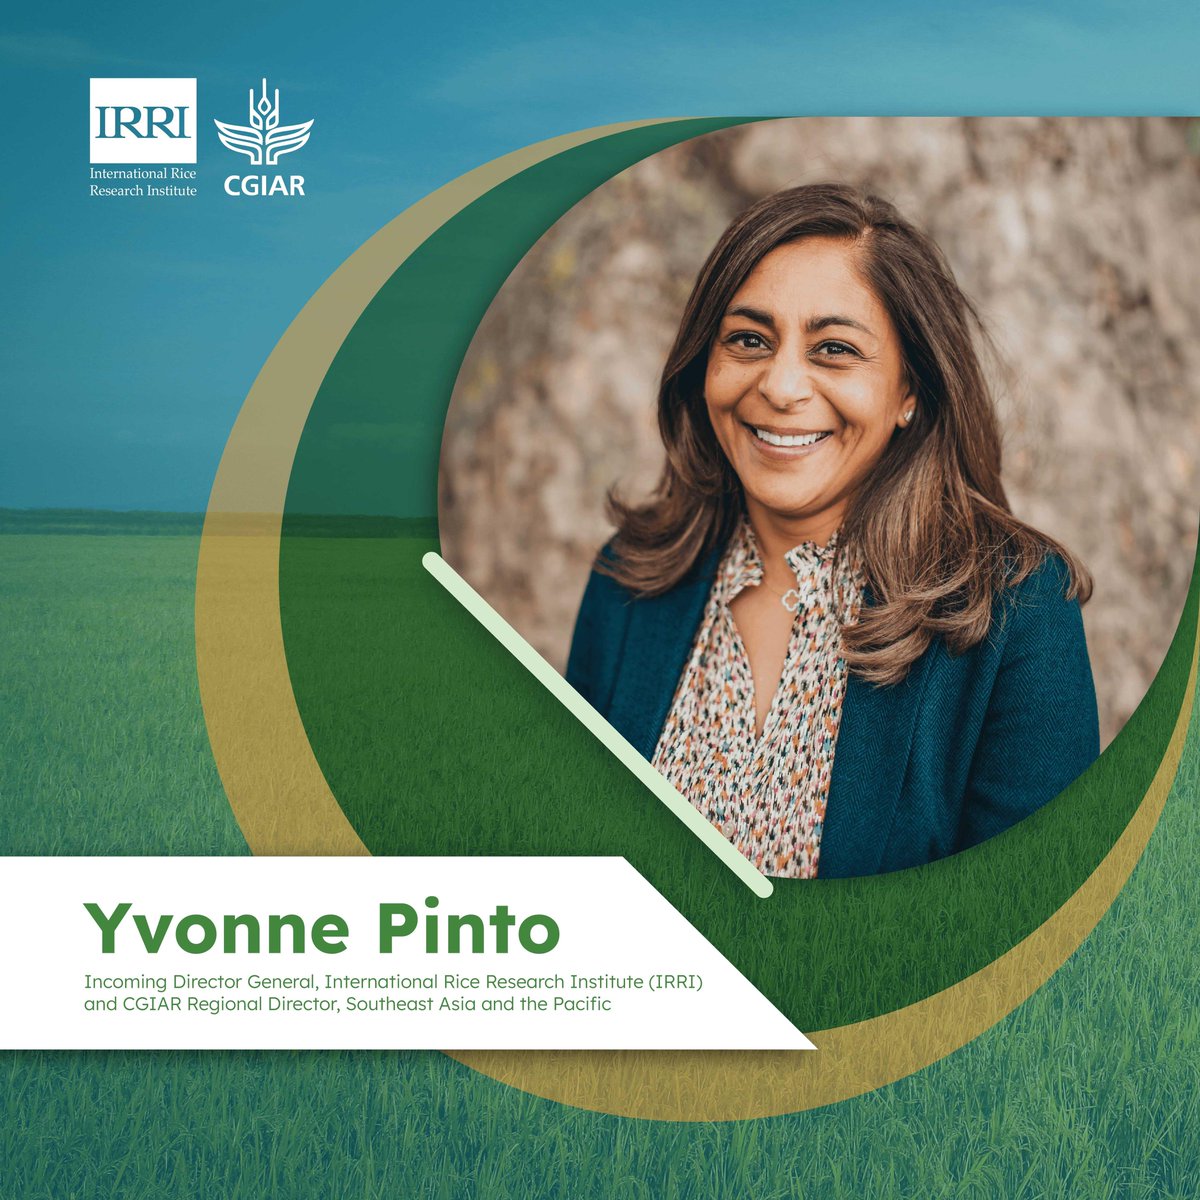 @IRRI is thrilled to announce the appointment of Dr. Yvonne Pinto as the institute's new Director General, effective 22 Apr 2024. Dr. Pinto makes IRRI history as its first female Director General. 🔗Read the full story here: bit.ly/DG-IRRI @CGIAR #OneCGIAR #RiceScience